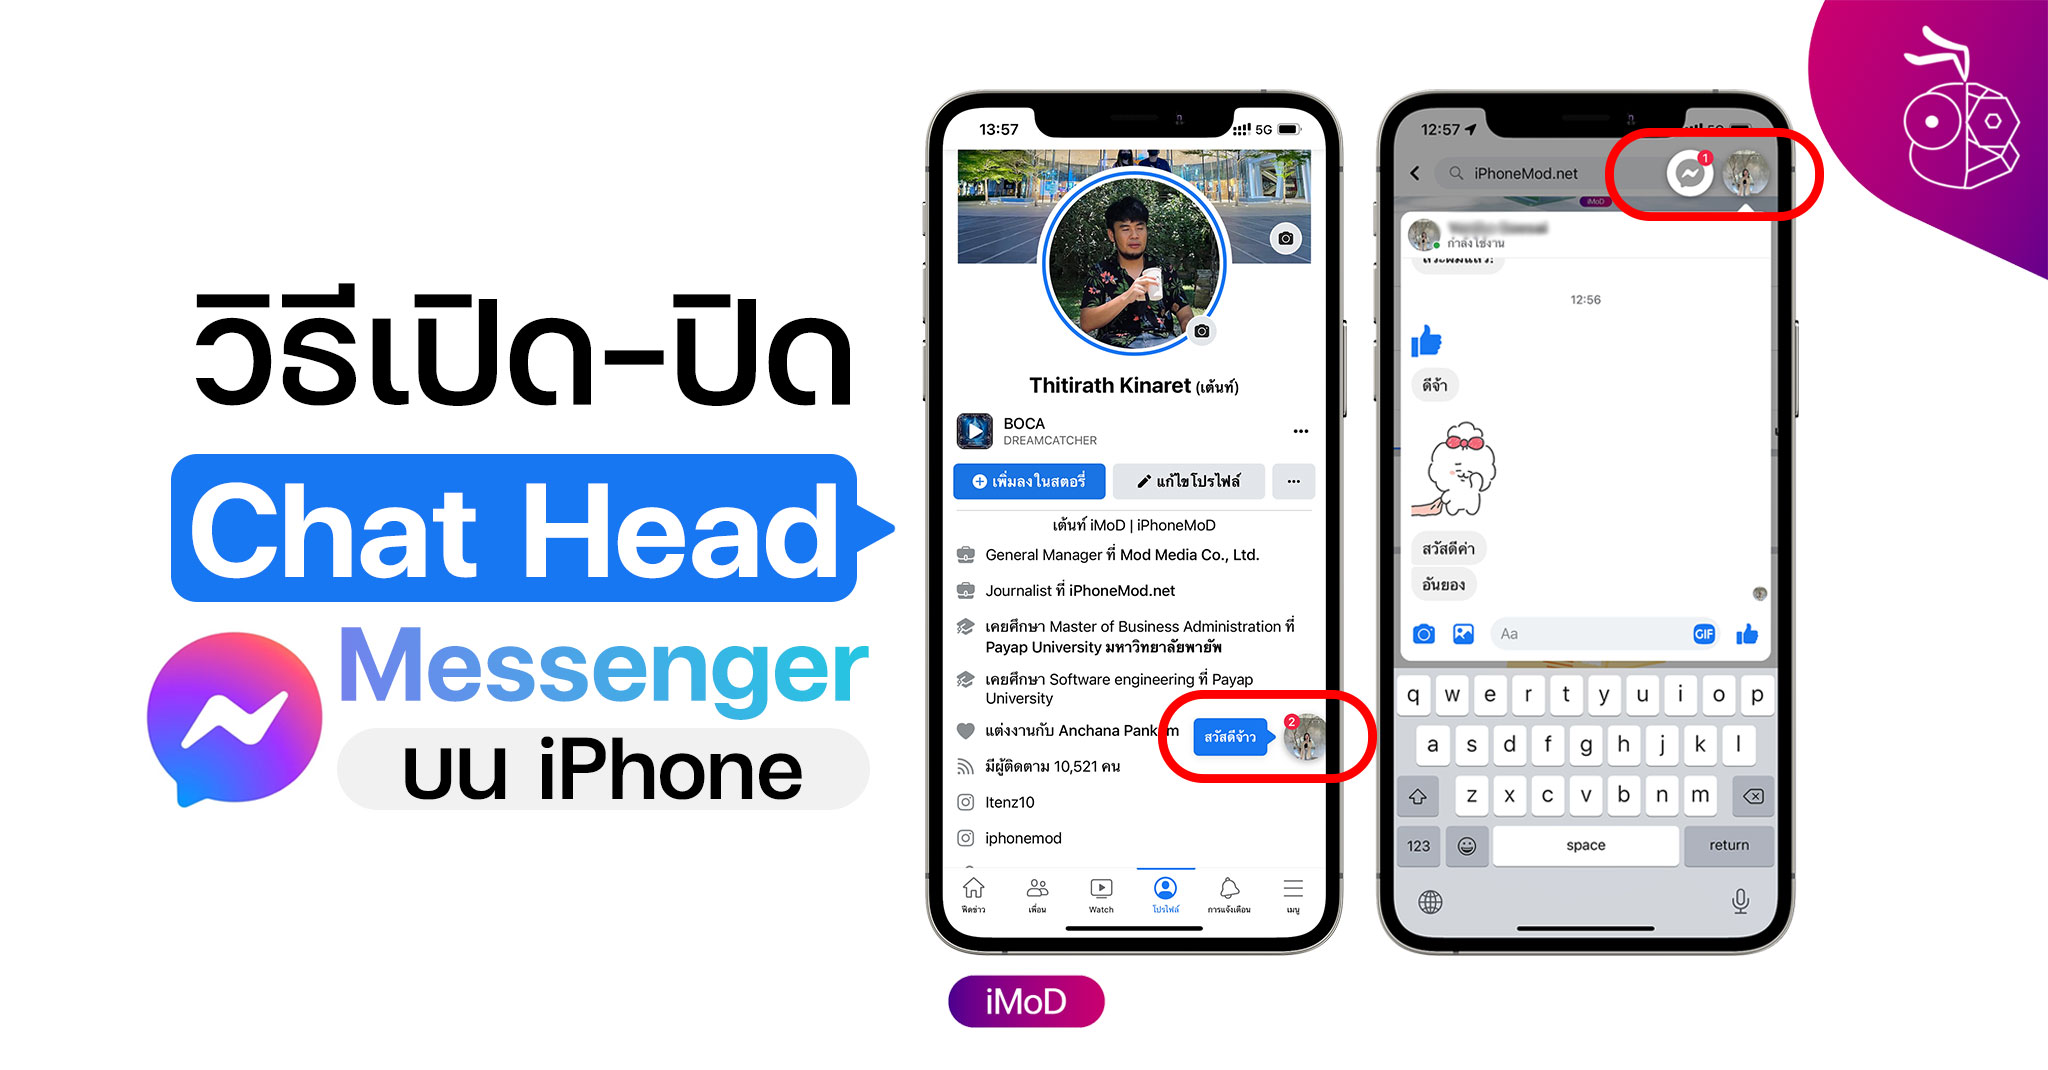 Ready go to ... https://www.iphonemod.net/how-to-enable-disable-chat-head-facebook-messenger.html [ วิธีเปิด-ปิด แชทเฮด (Chat Head) ของ Messenger ใน Facebook]